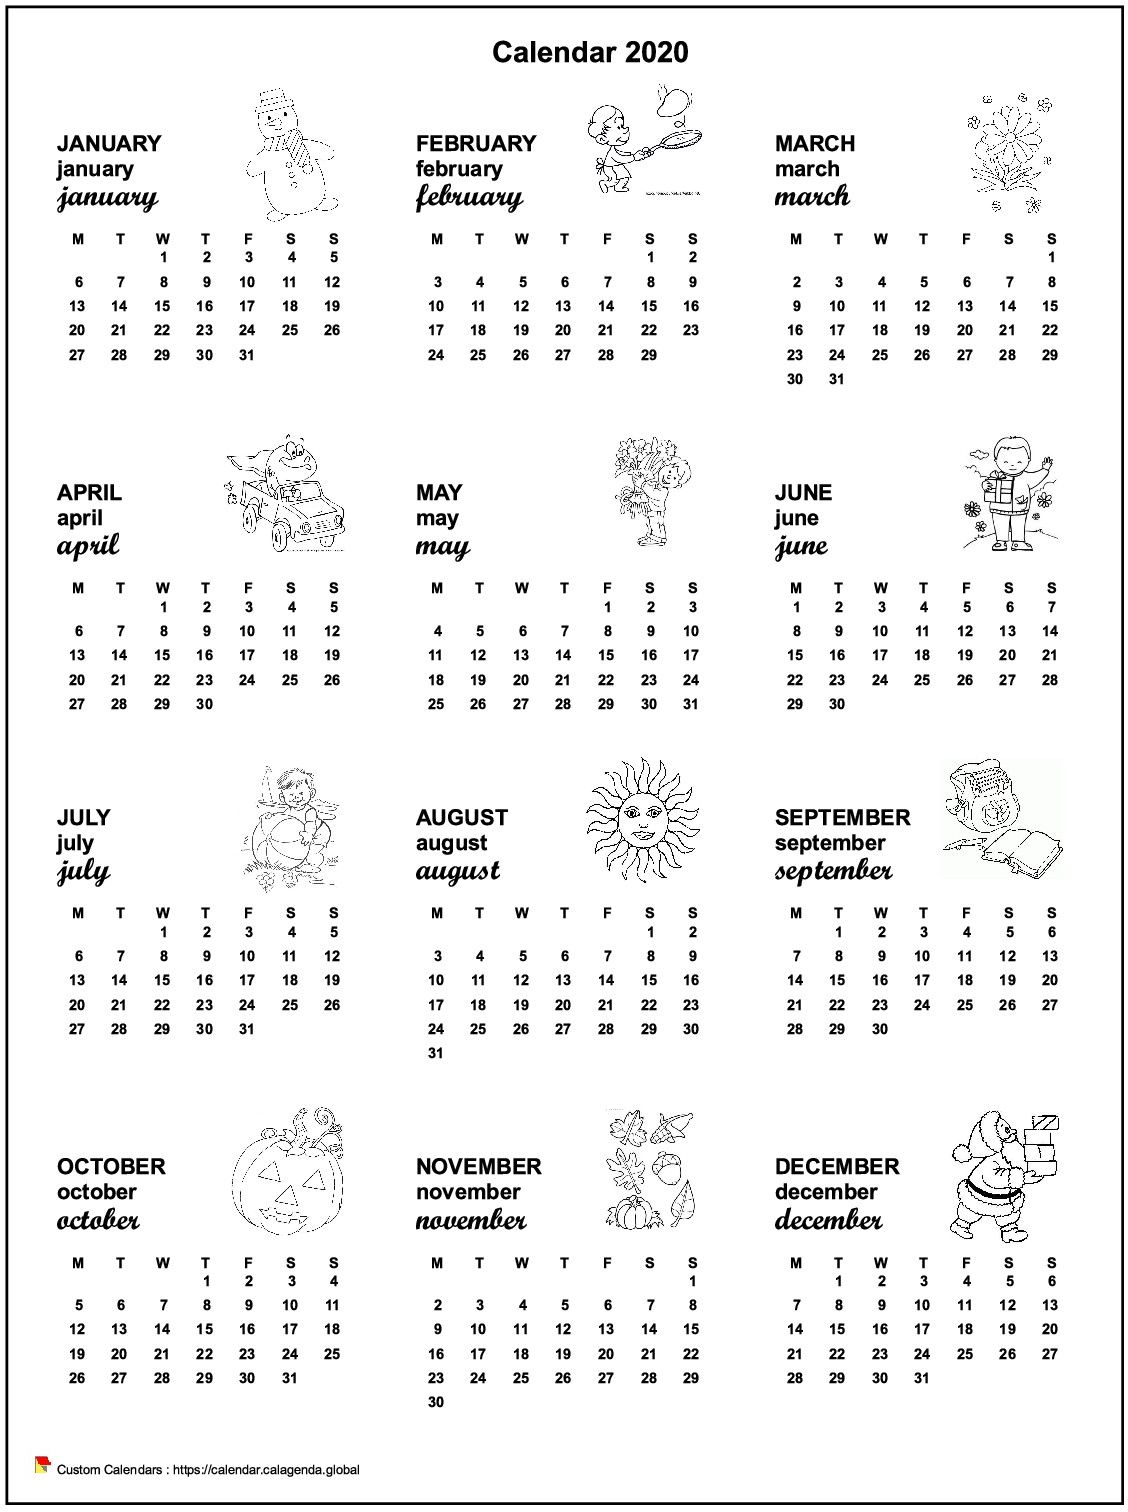 Calendar 2040 annual maternal and primary school